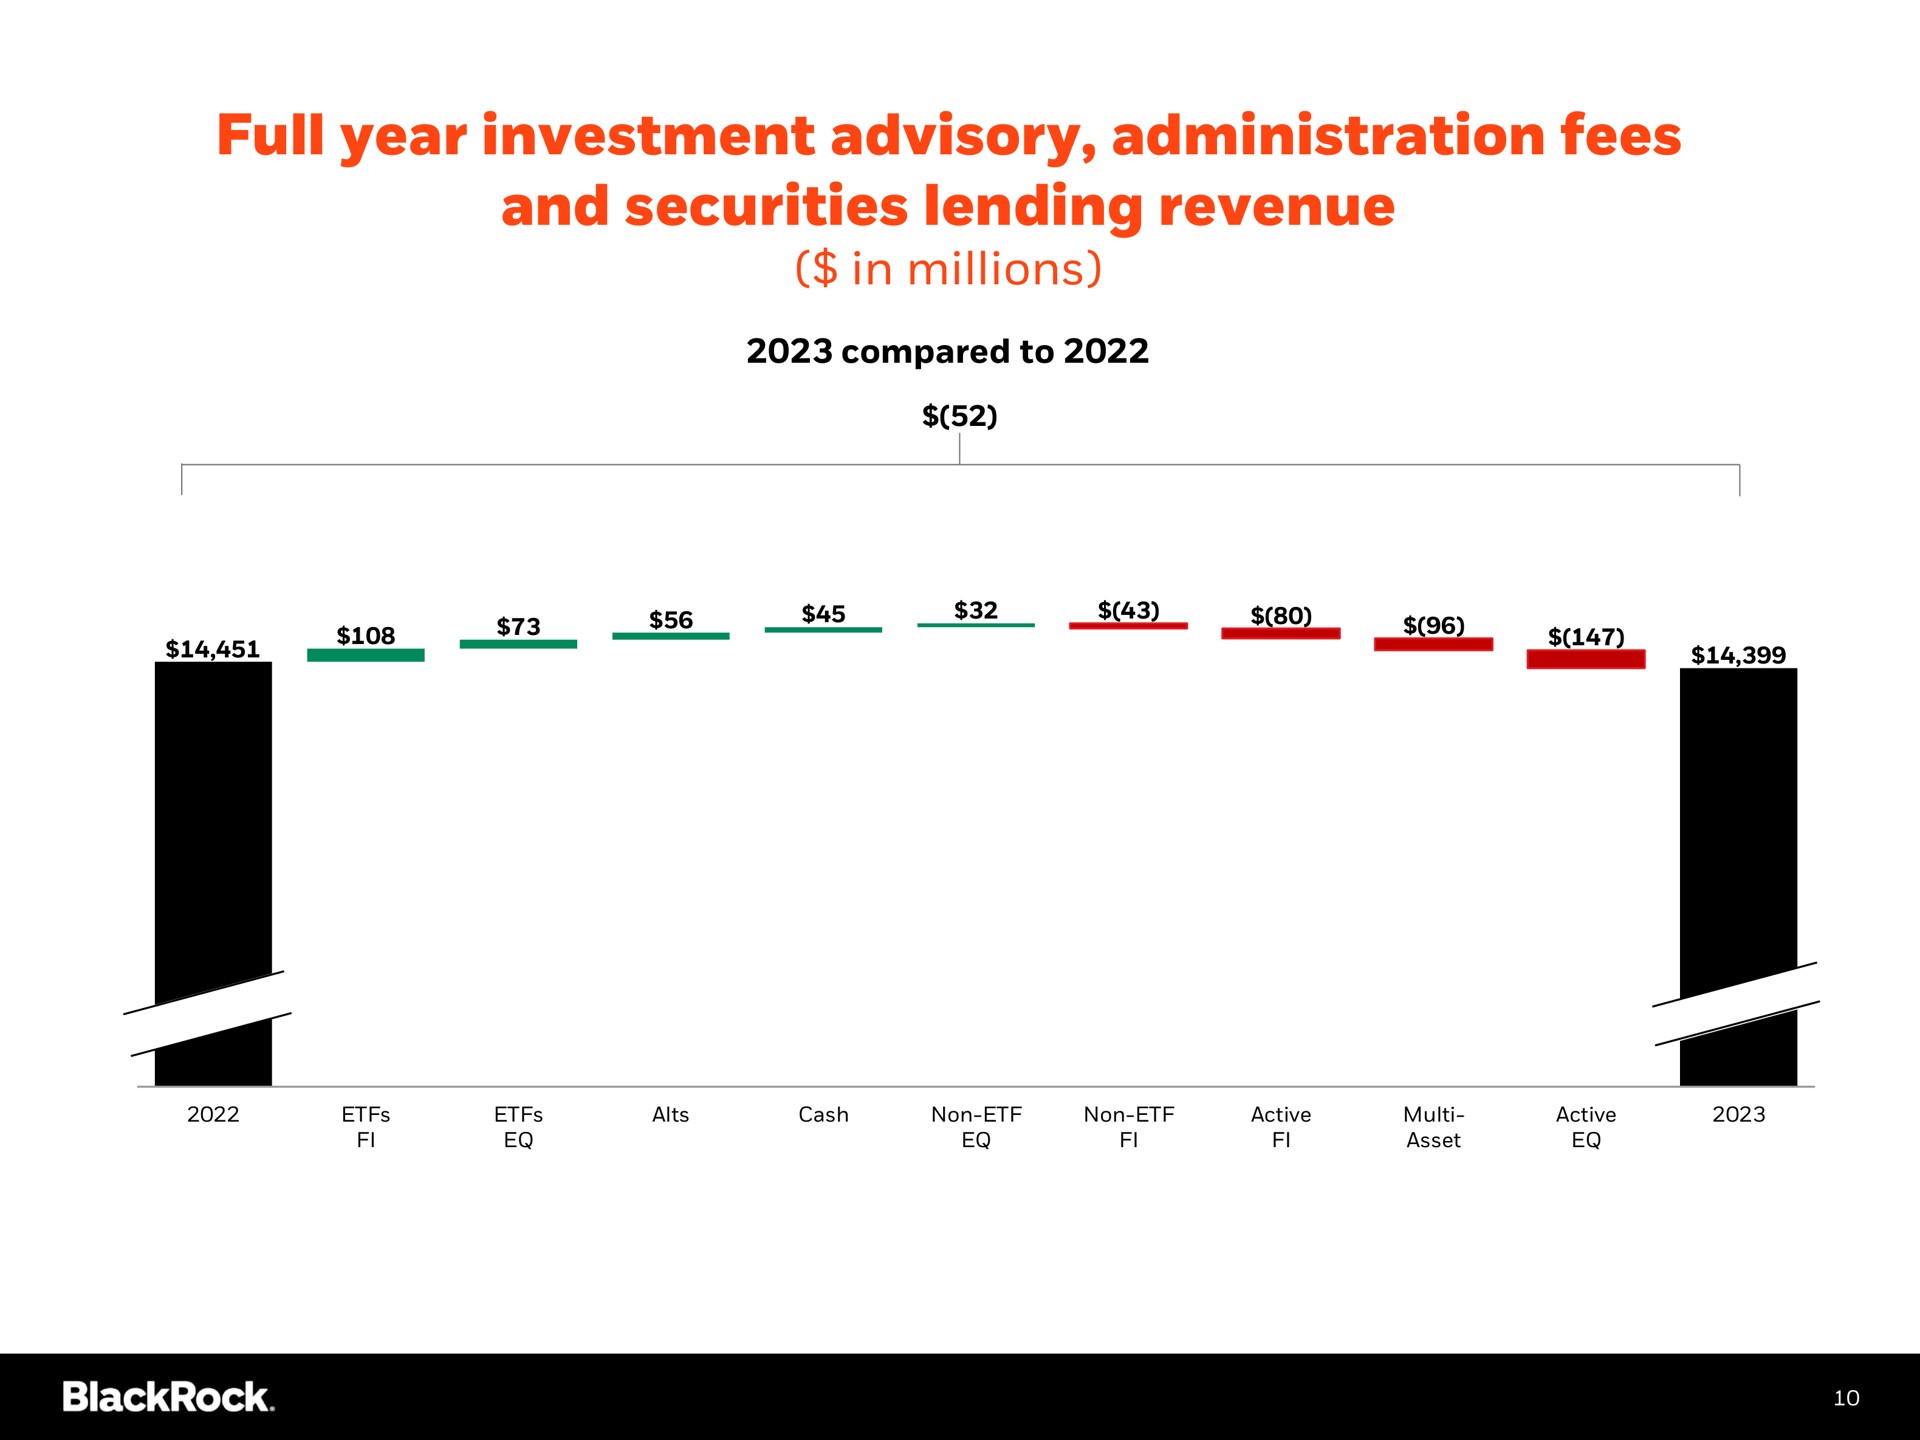 full year investment advisory administration fees and securities lending revenue in millions | BlackRock